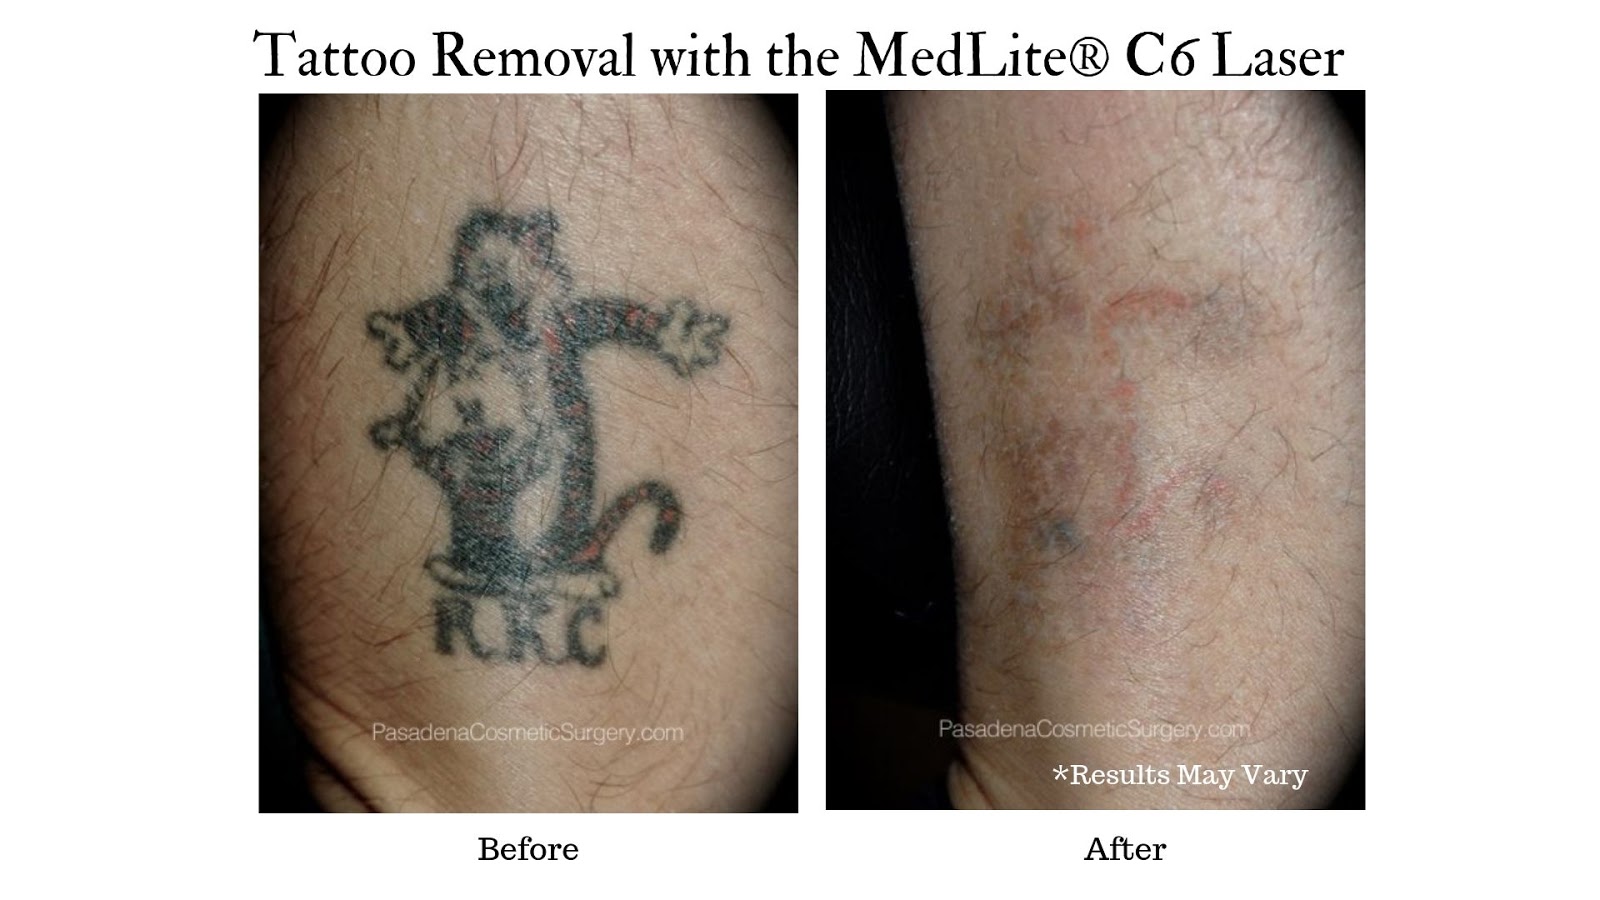 What Should You Know About Tattoo Removal? | Pasadena Cosmetic Surgery